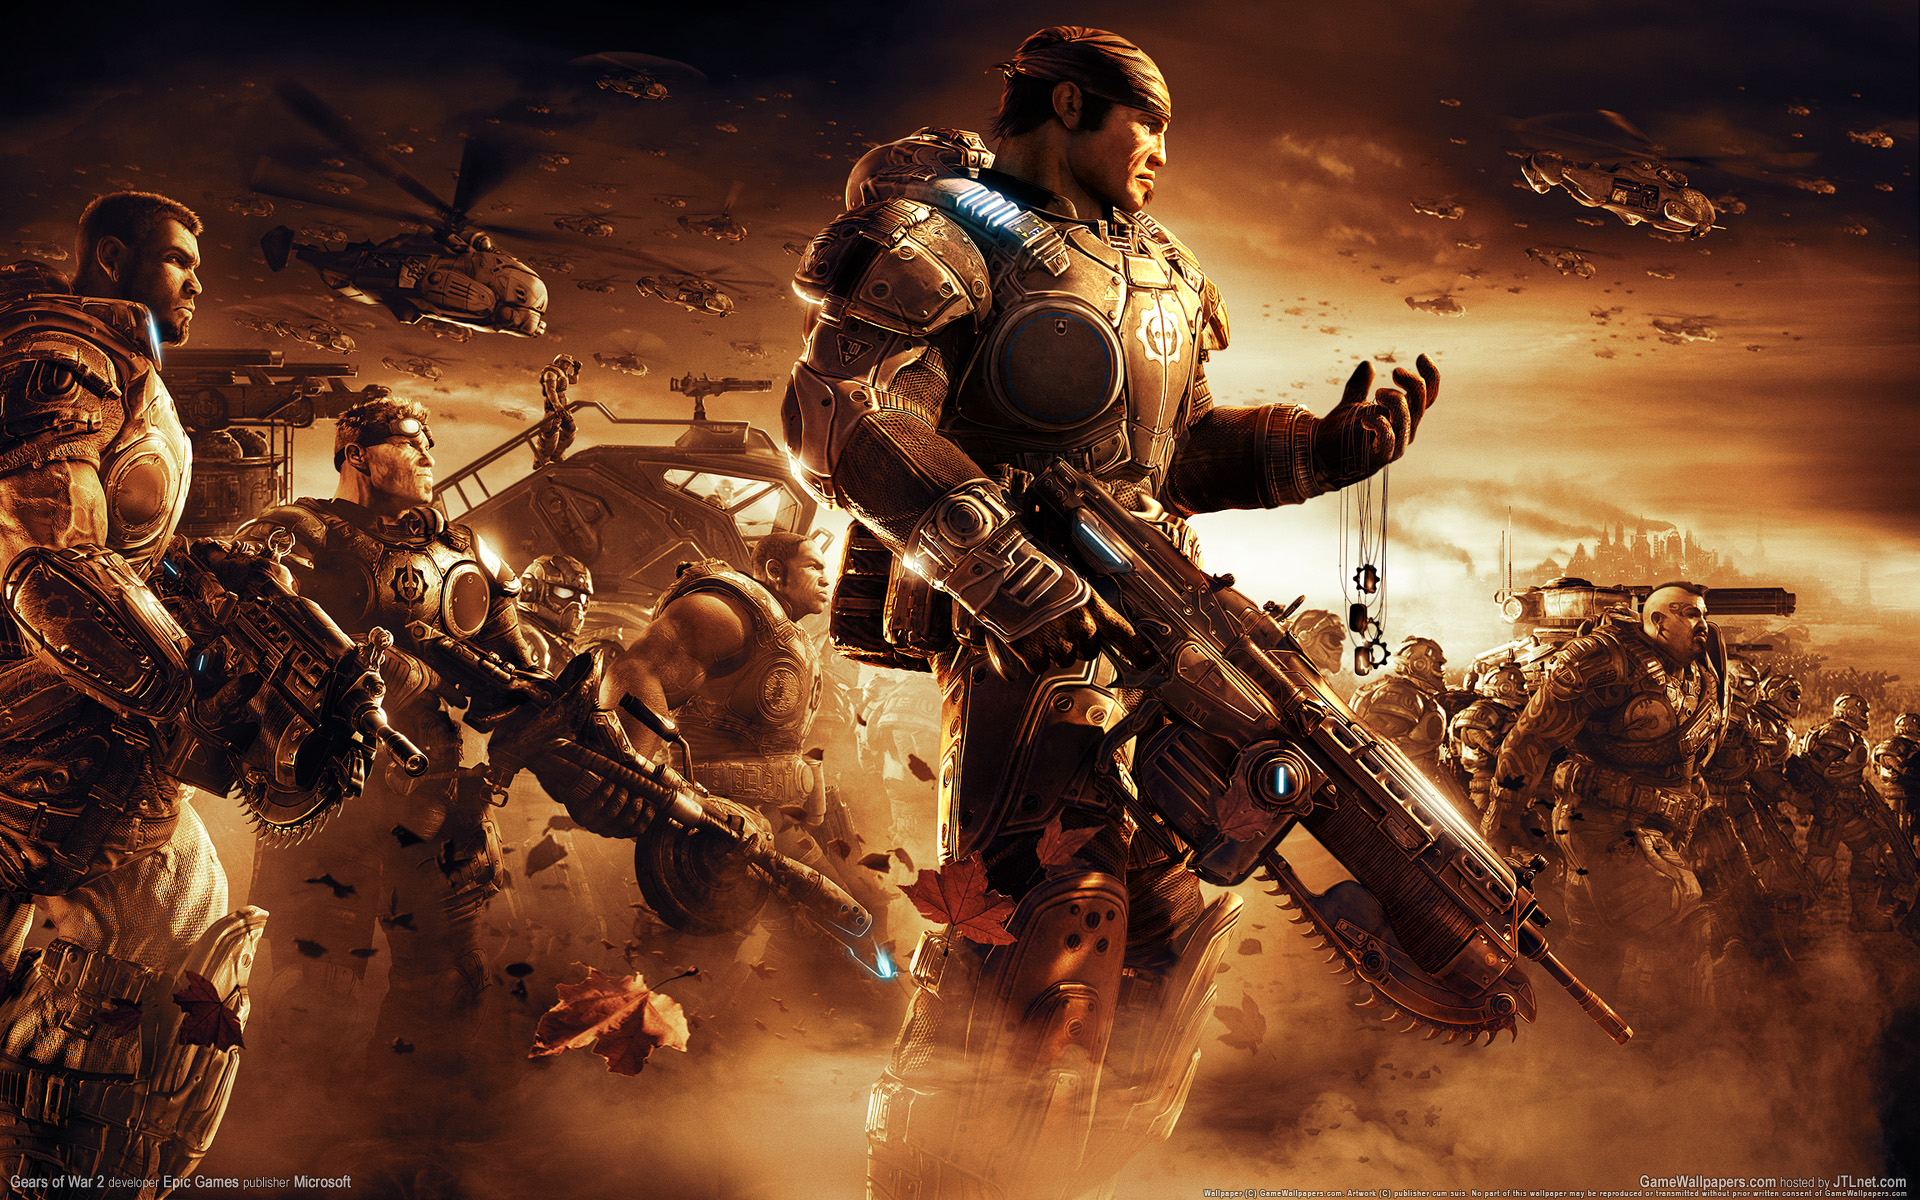 22 Awesome 3D Game Wallpapers Gears of War   Downloads